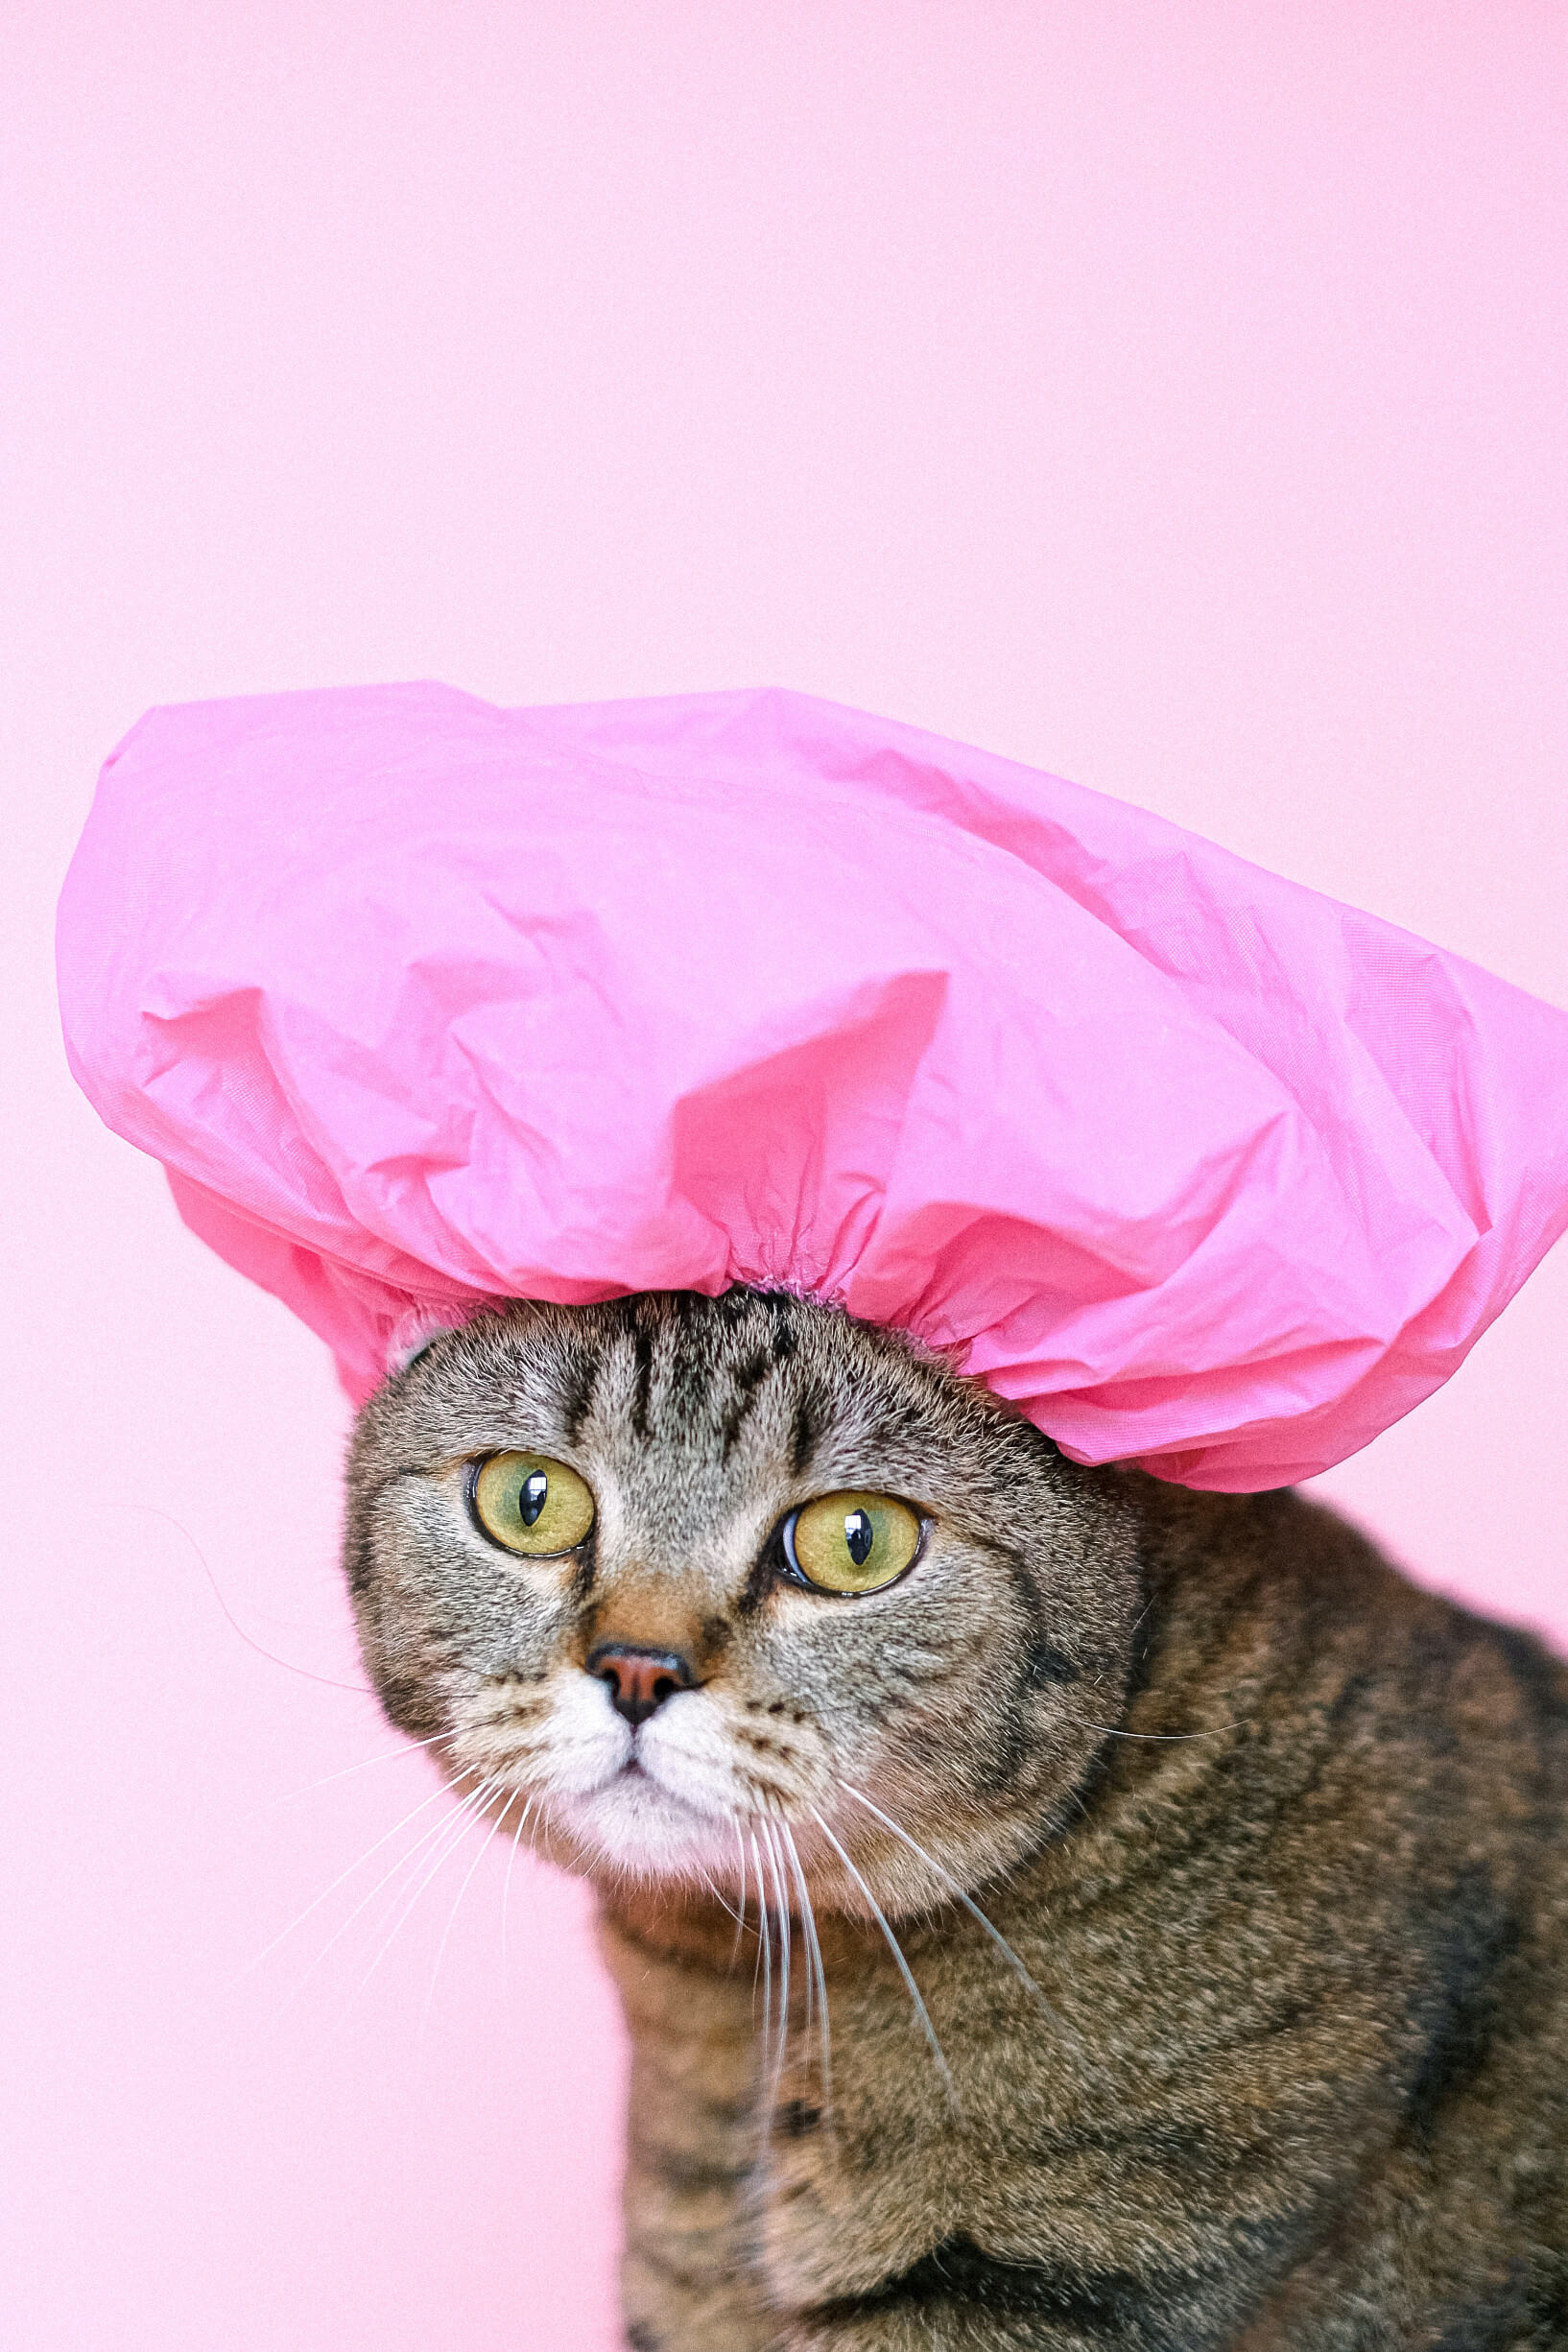 Stock image of a cat with a hat